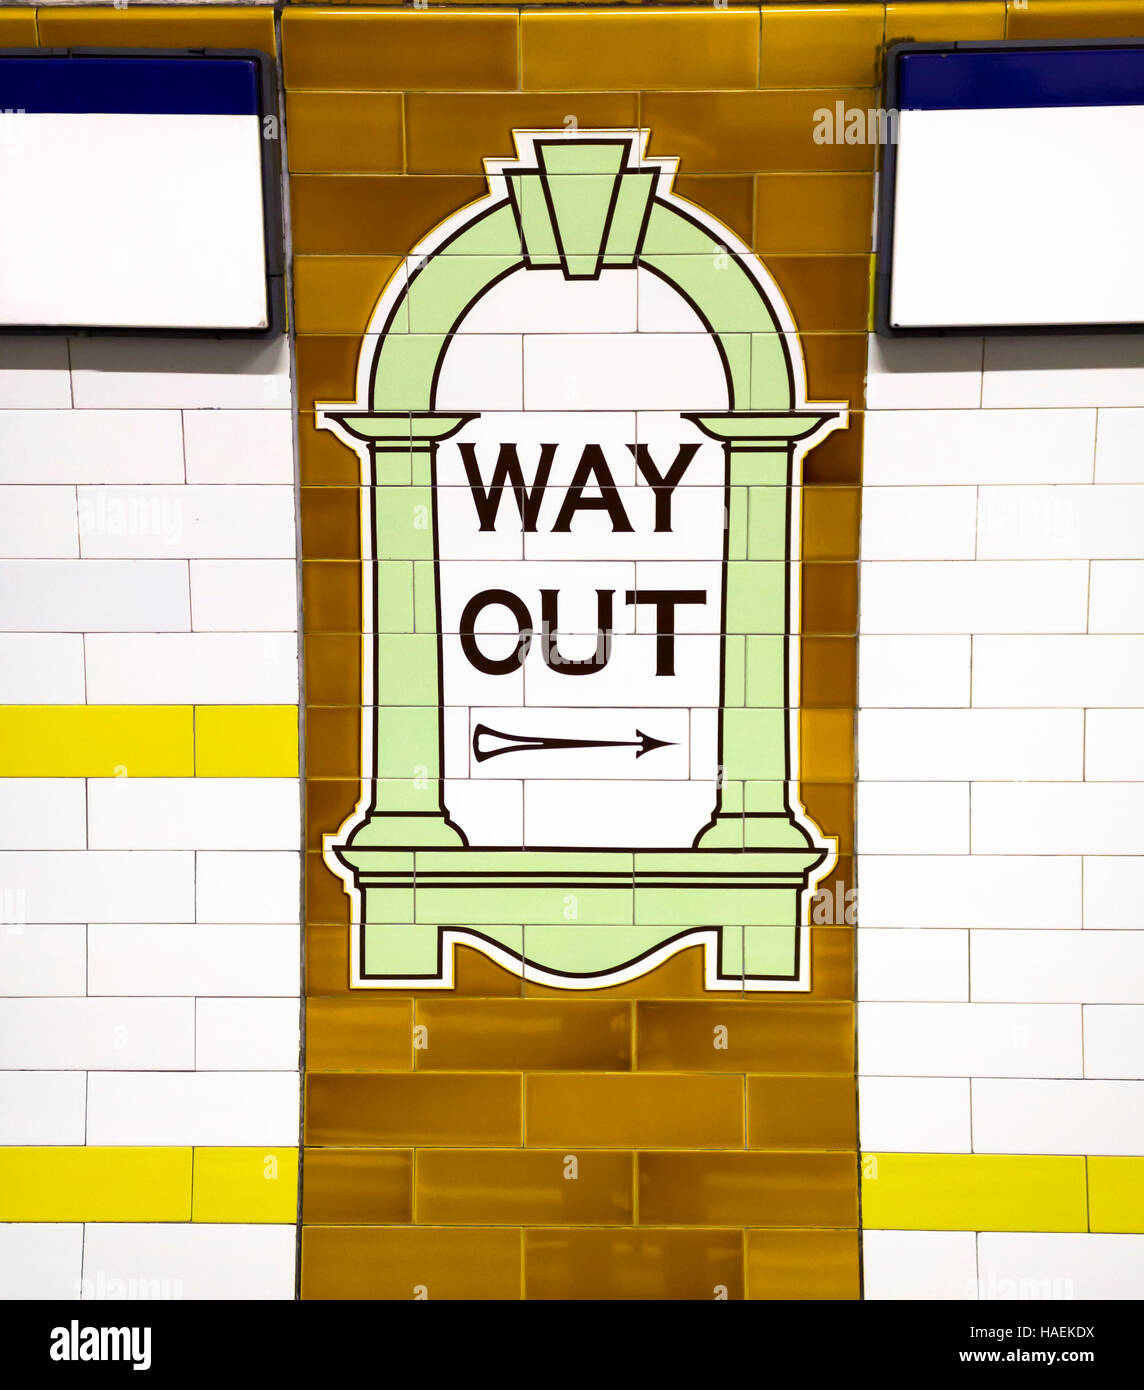 LONDON - NOV 15: A vintage-inspired Way Out sign, painted on the wall tiles in the London Underground, November 15, 2012, England Stock Photo